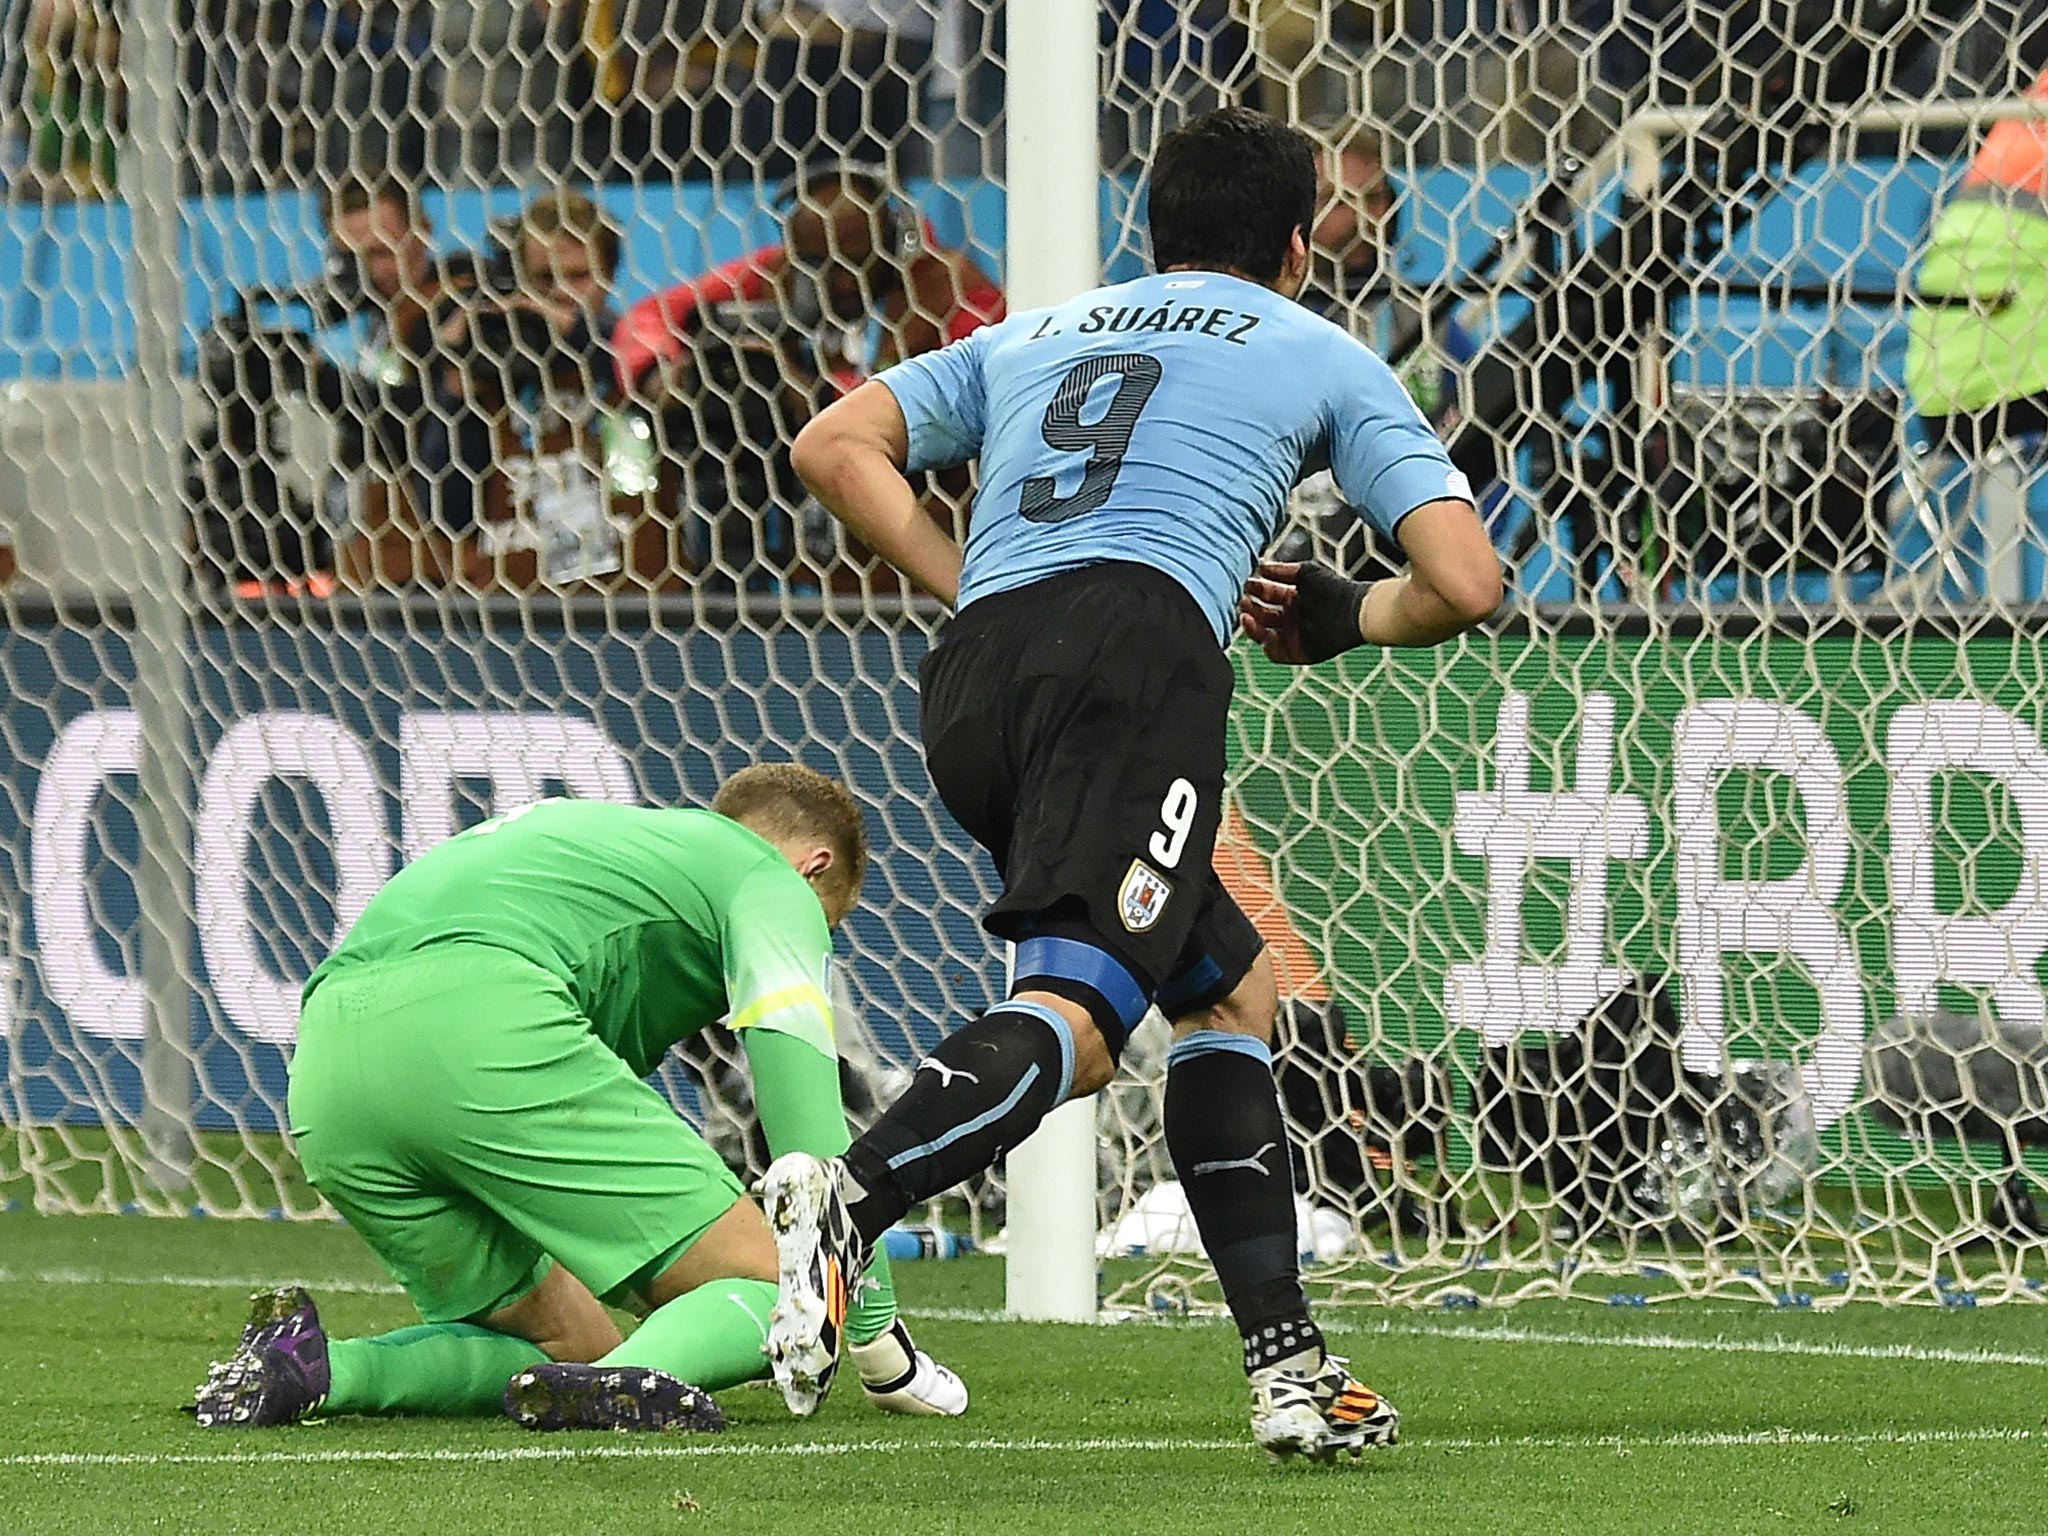 Luis Suarez runs away in triumph after making England pay the full price for their late defensive lapse